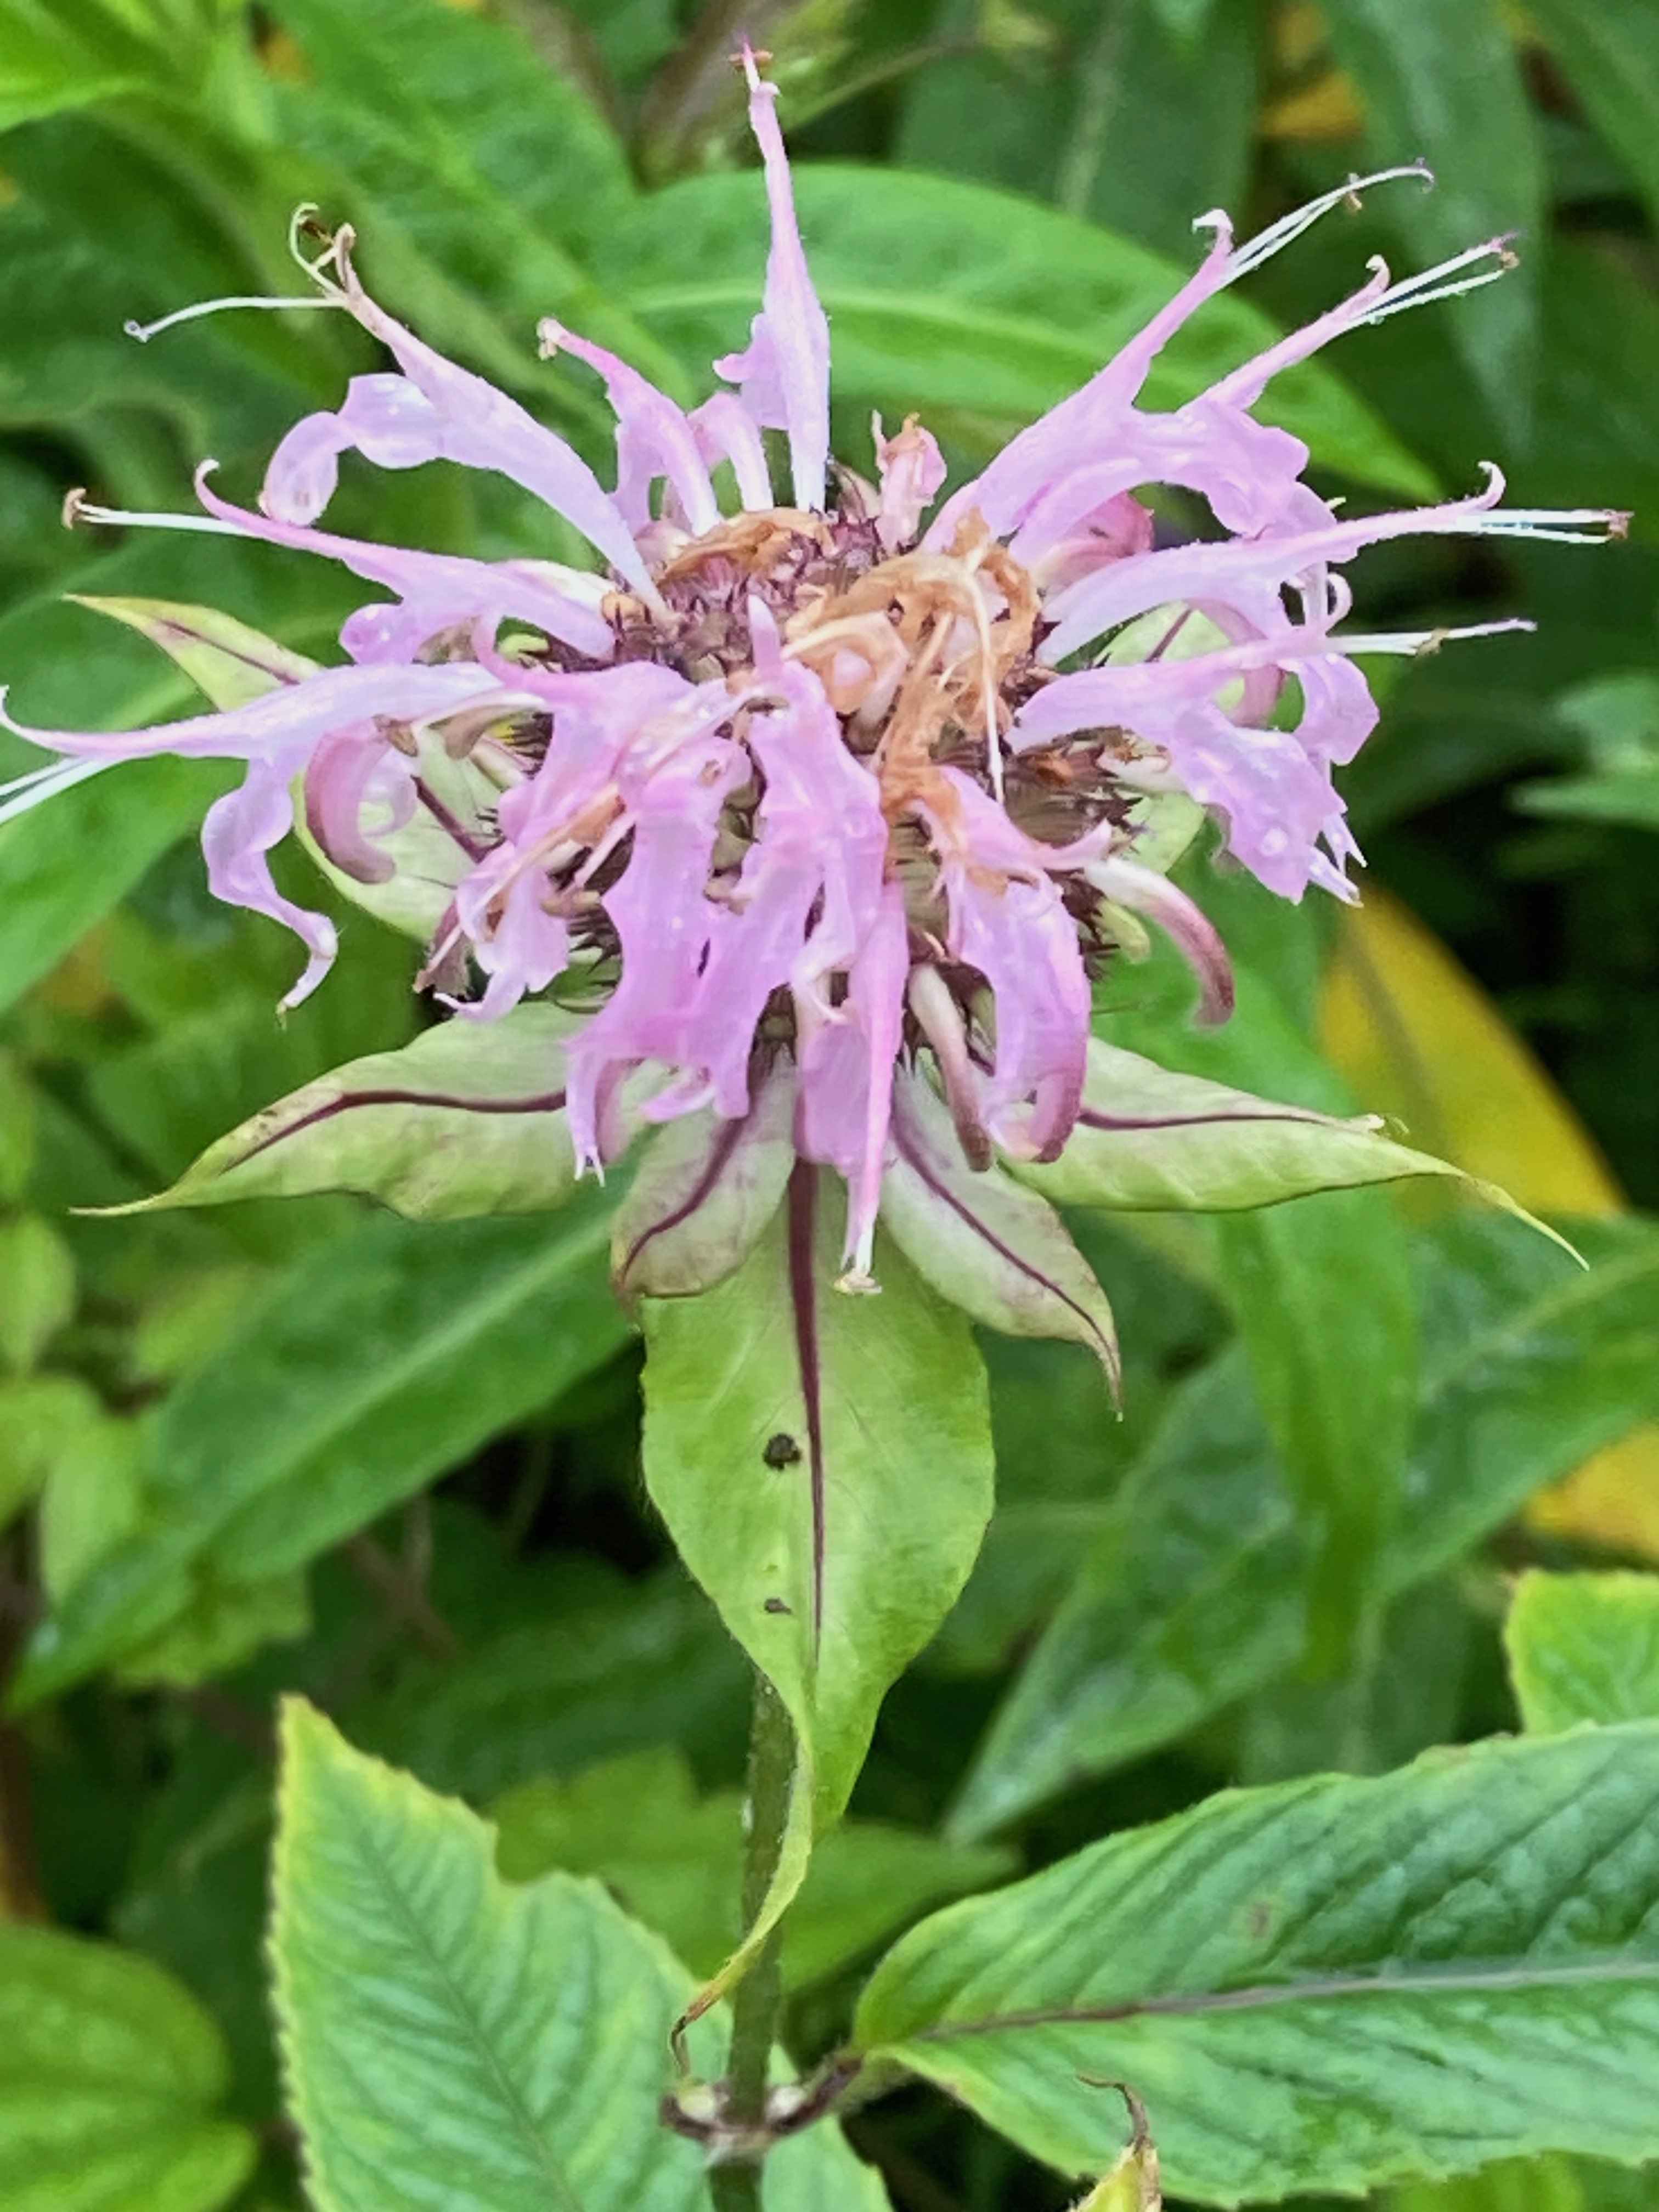 The Scientific Name is Monarda fistulosa. You will likely hear them called Wild Bergamot. This picture shows the Two-lipped, tubular flowers in terminal heads. Each flower head is subtended by a whorl of pinkish, leafy bracts.  of Monarda fistulosa